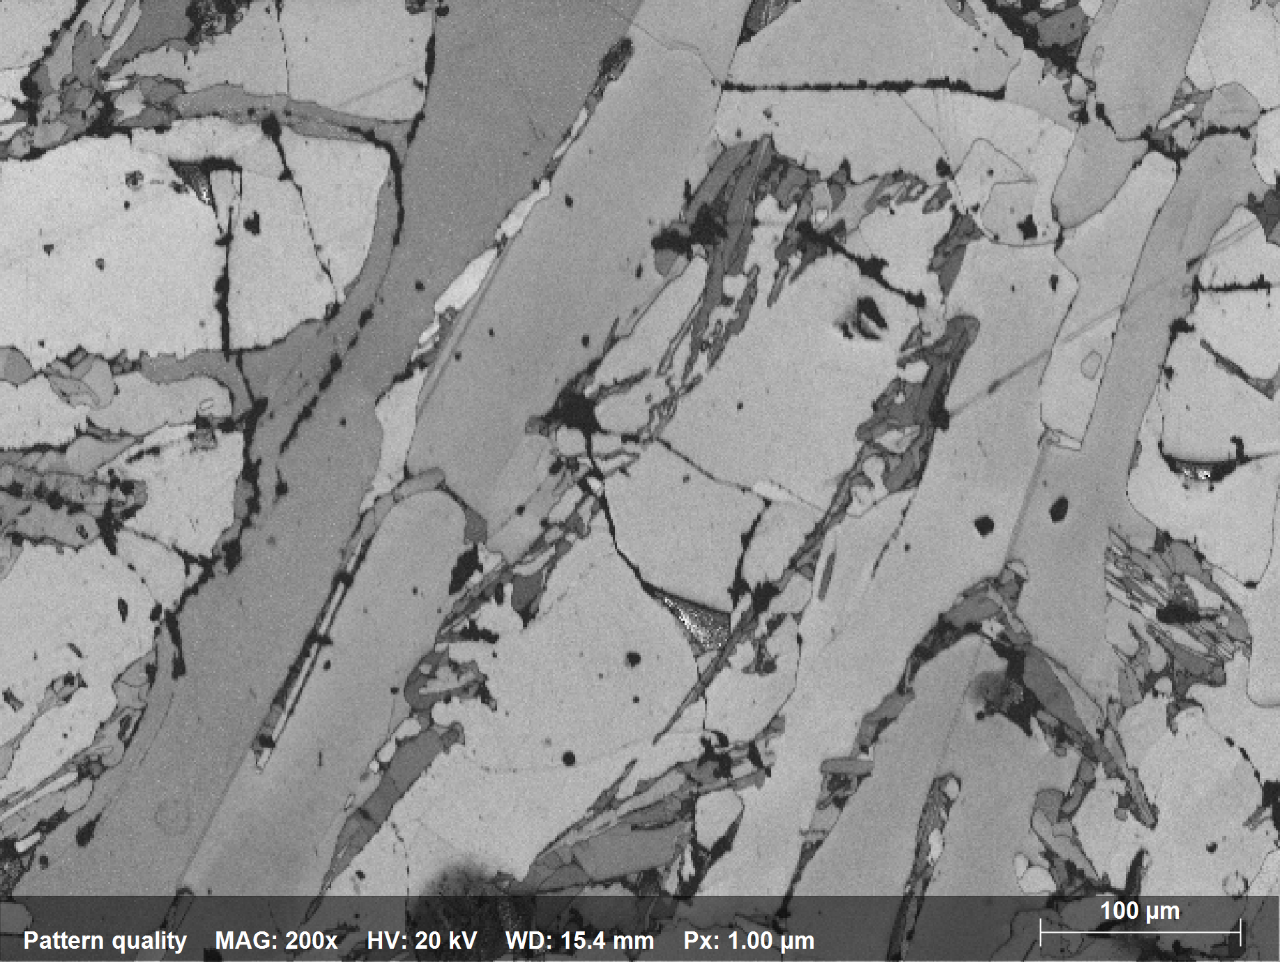 Fig. 1.1: Pattern Quality Map depicting the microstructure of highly alloyed Fe-Si ceramic composite; EBSD and EDS maps were acquired simultaneously using e-Flash XS and respectively XFlash EDS detector mounted on JSM IT200 SEM.